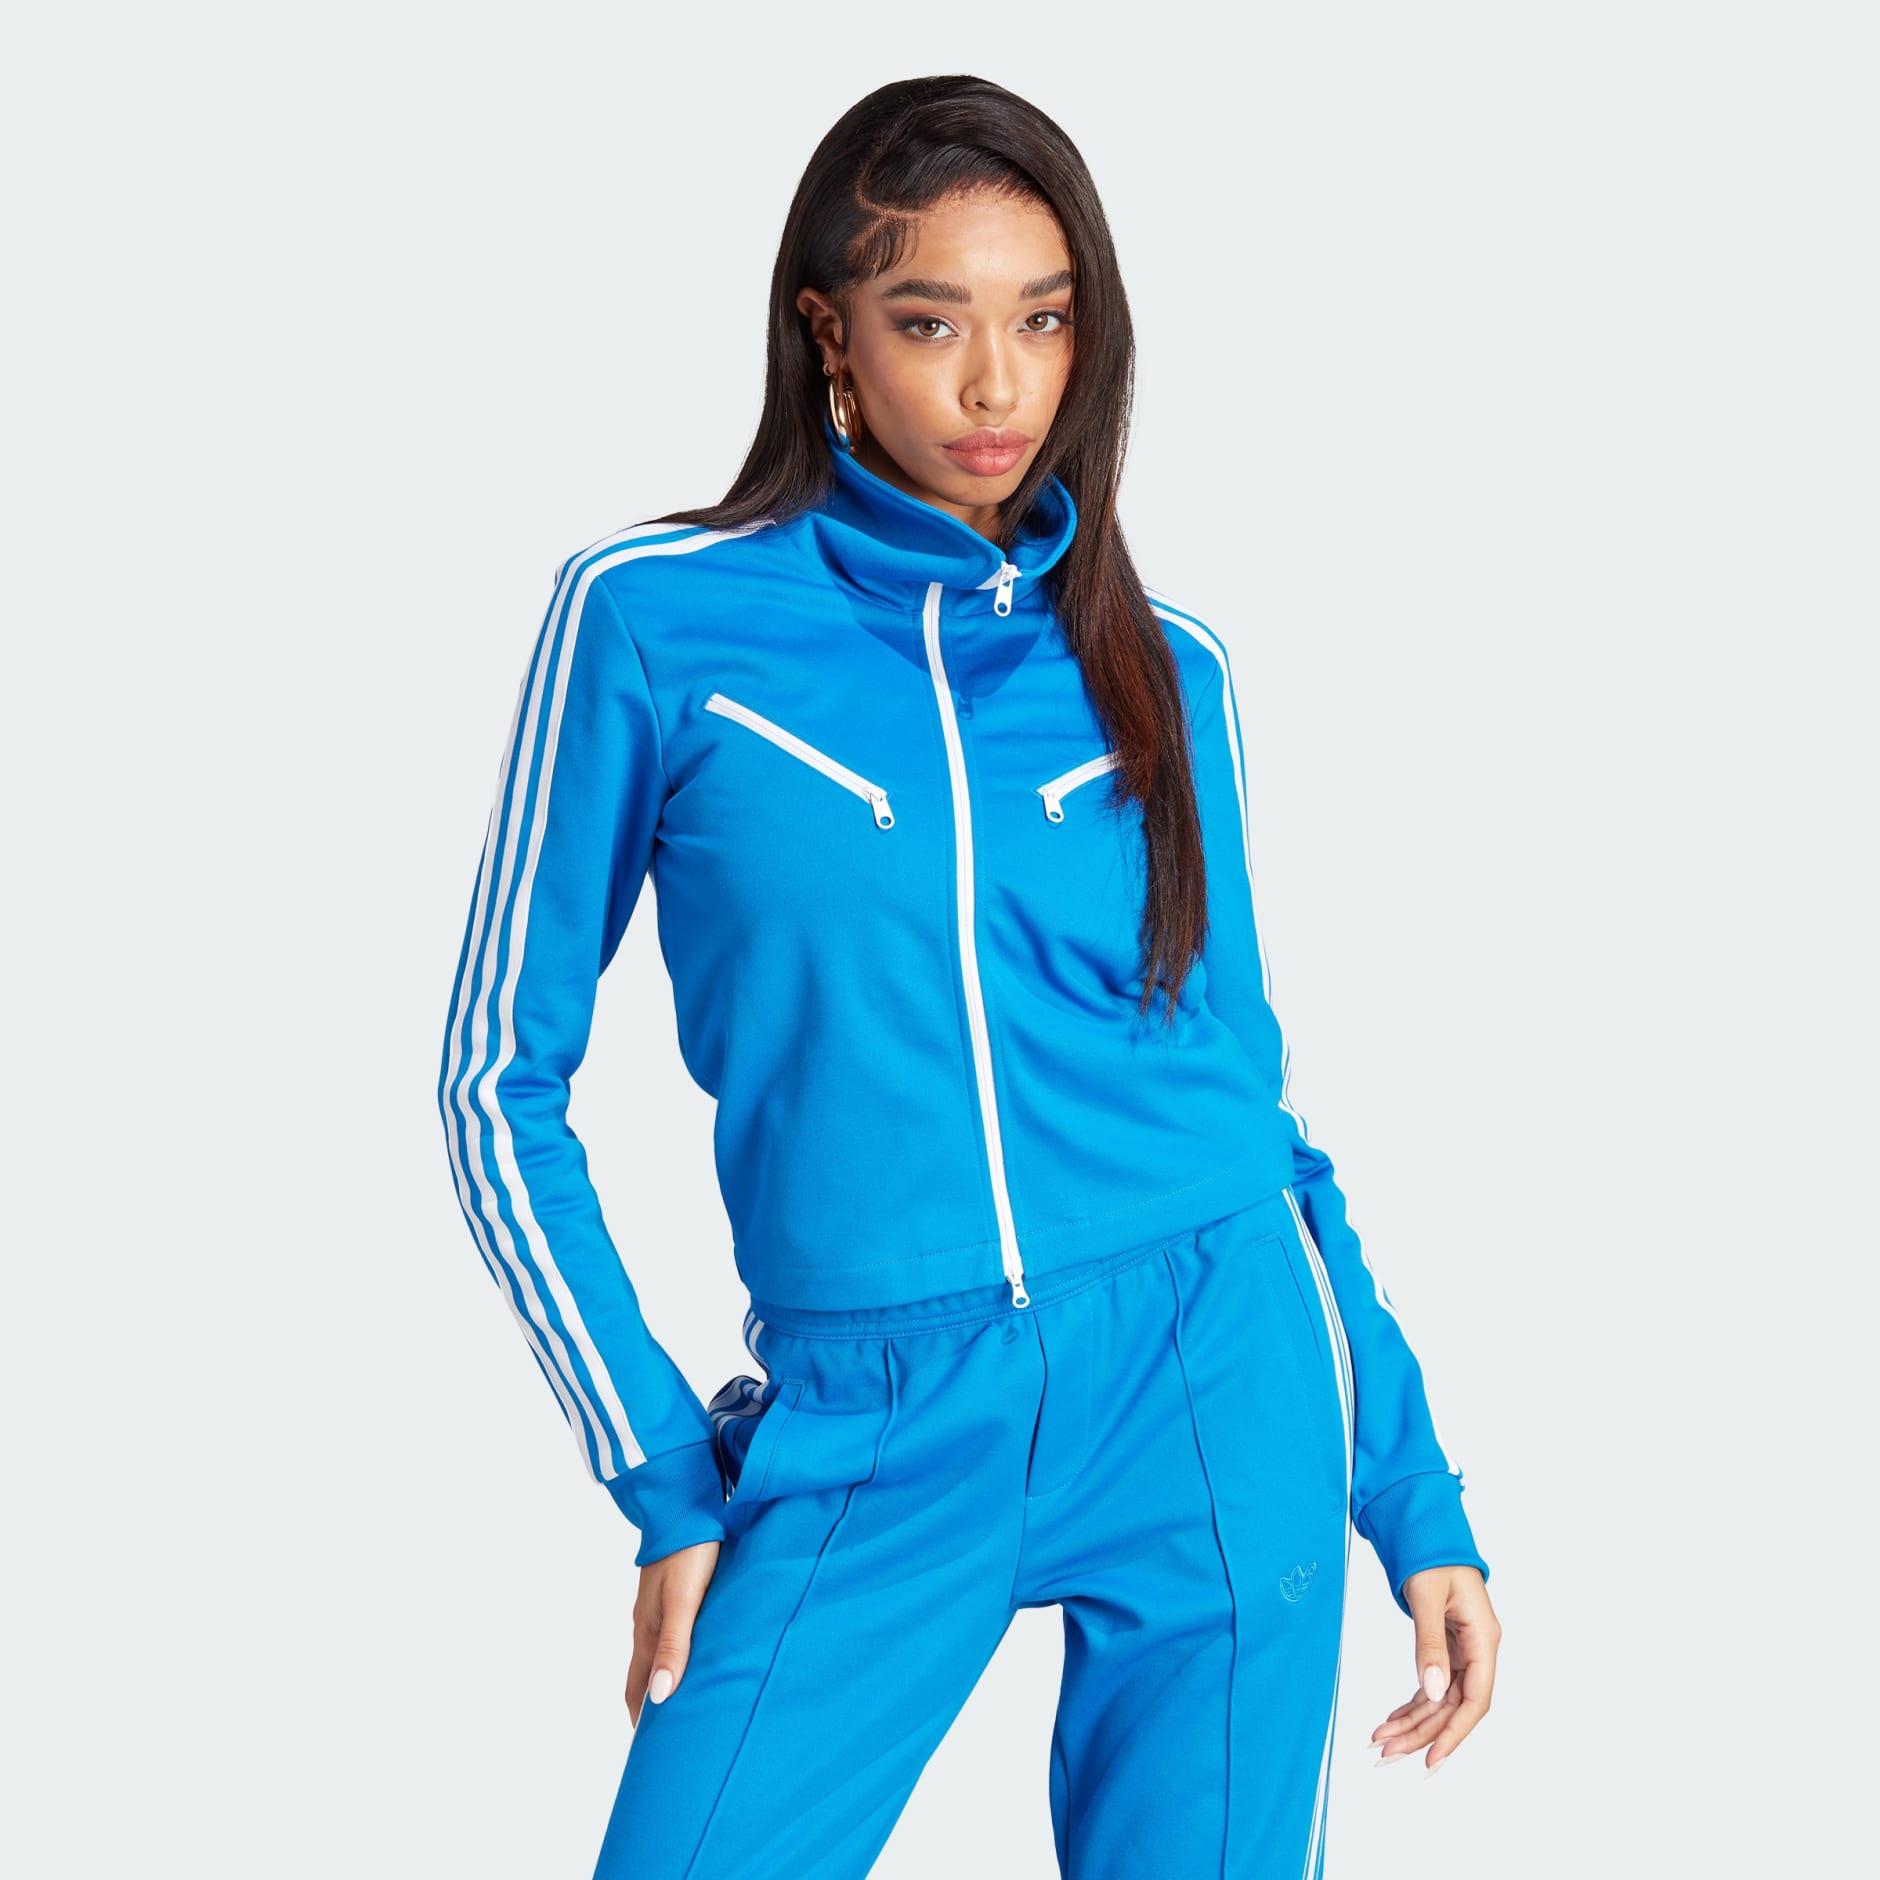 Women's Clothing - Blue Version Montreal Track Top - Blue | adidas 